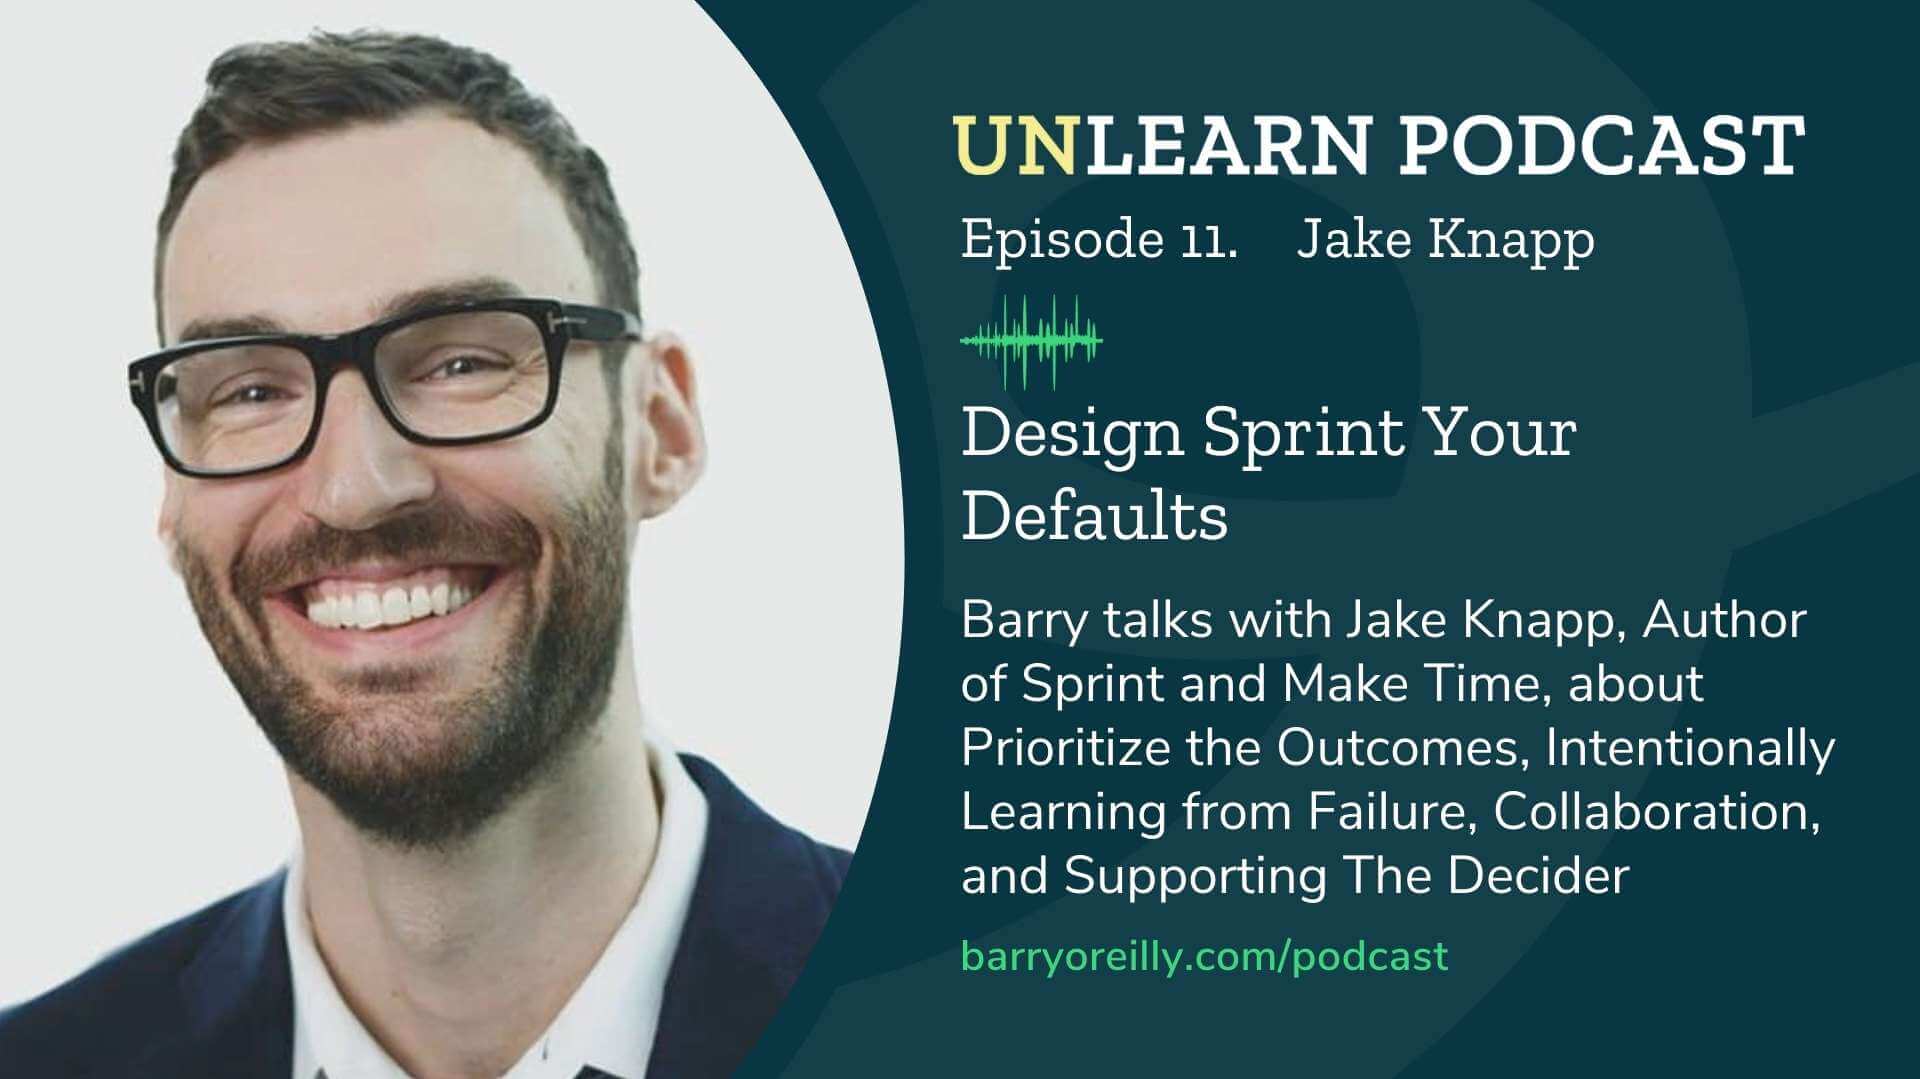 Design Sprint Your Defaults with Jake Knapp - Barry O'Reilly